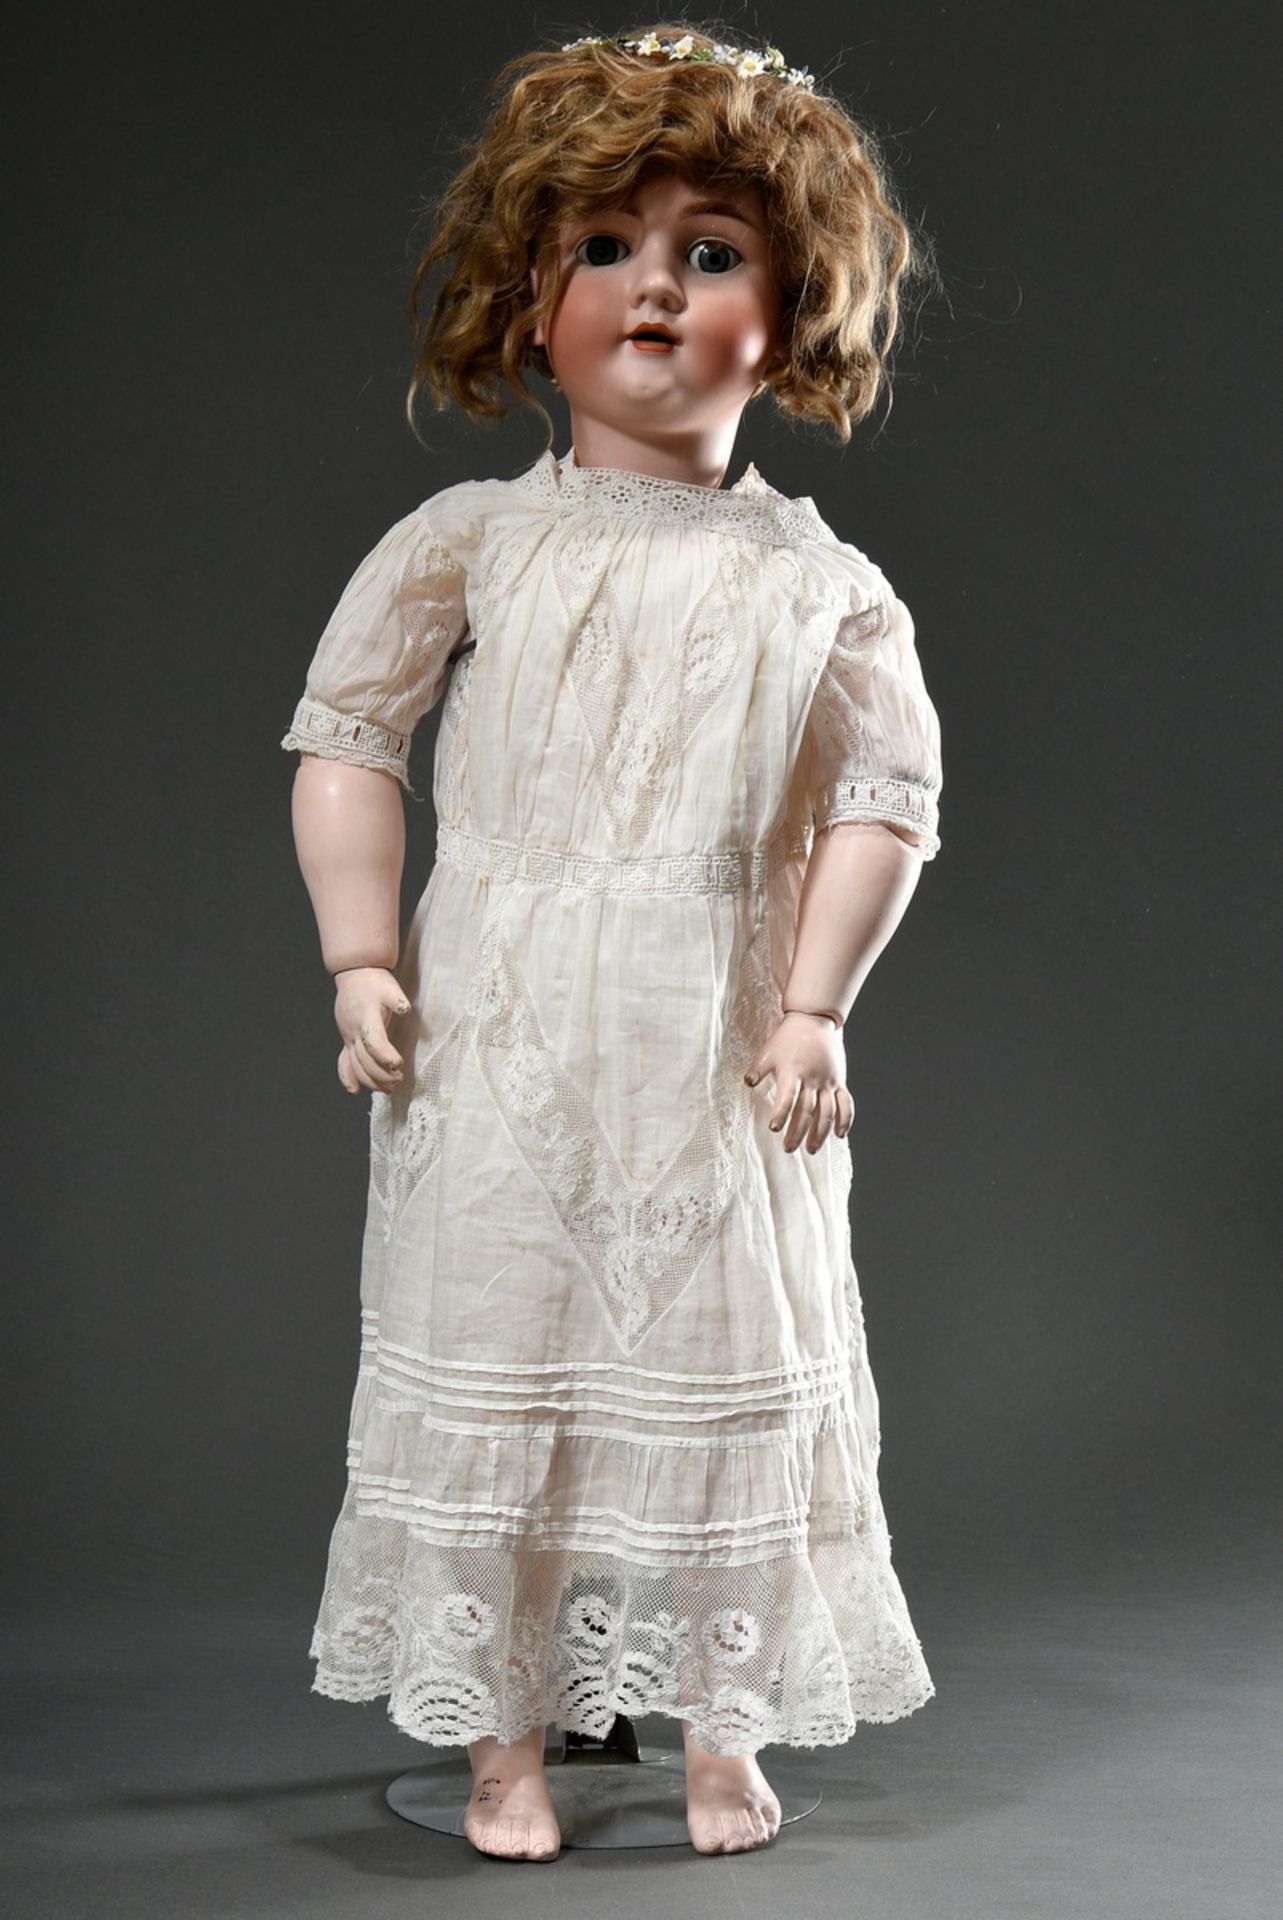 Kley & Hahn doll with bisque porcelain crank head, blue sleeping eyes, painted eyelashes, open mout